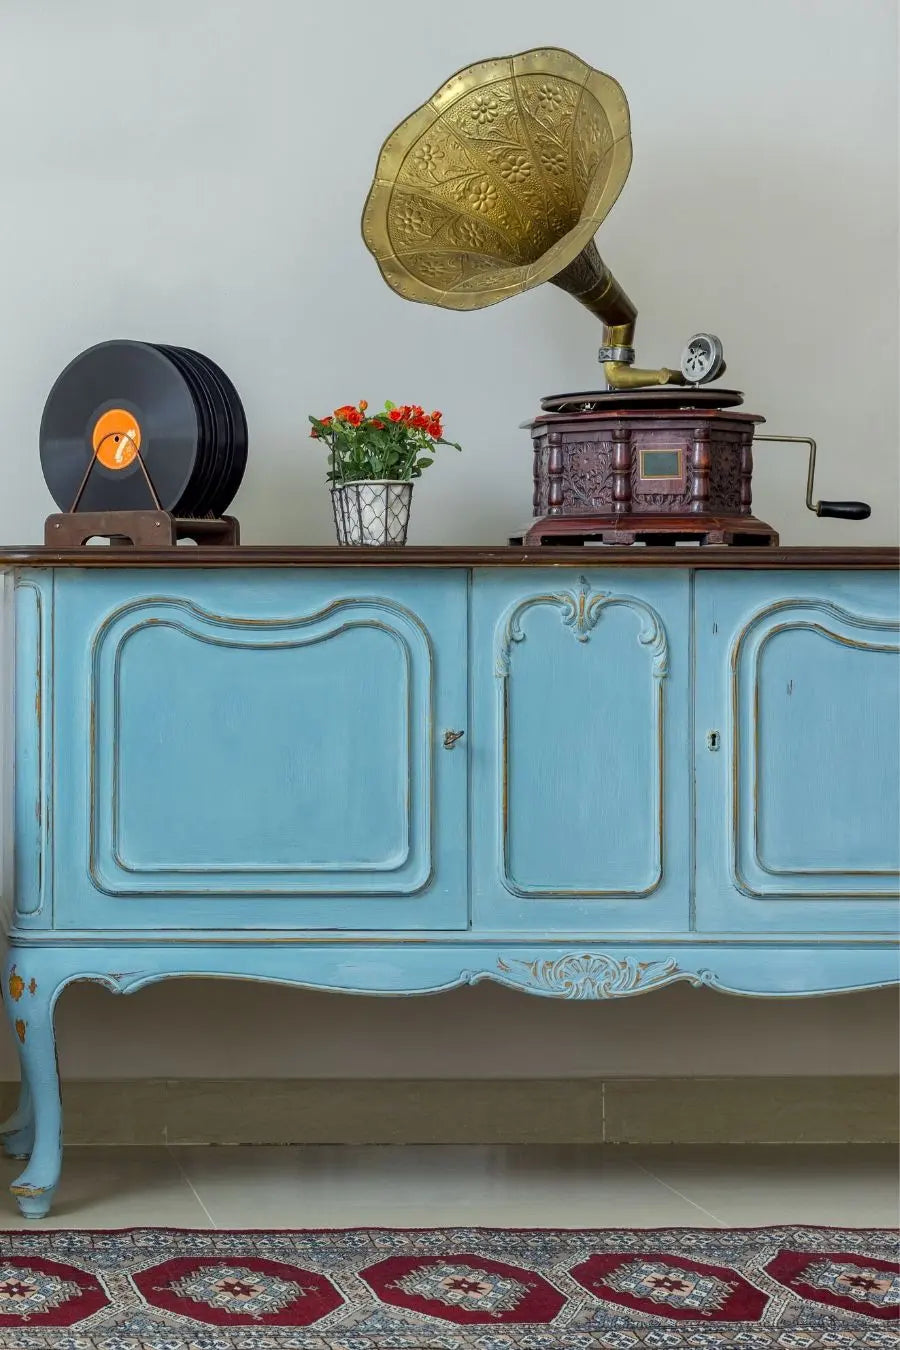 What Is Considered Vintage Furniture?